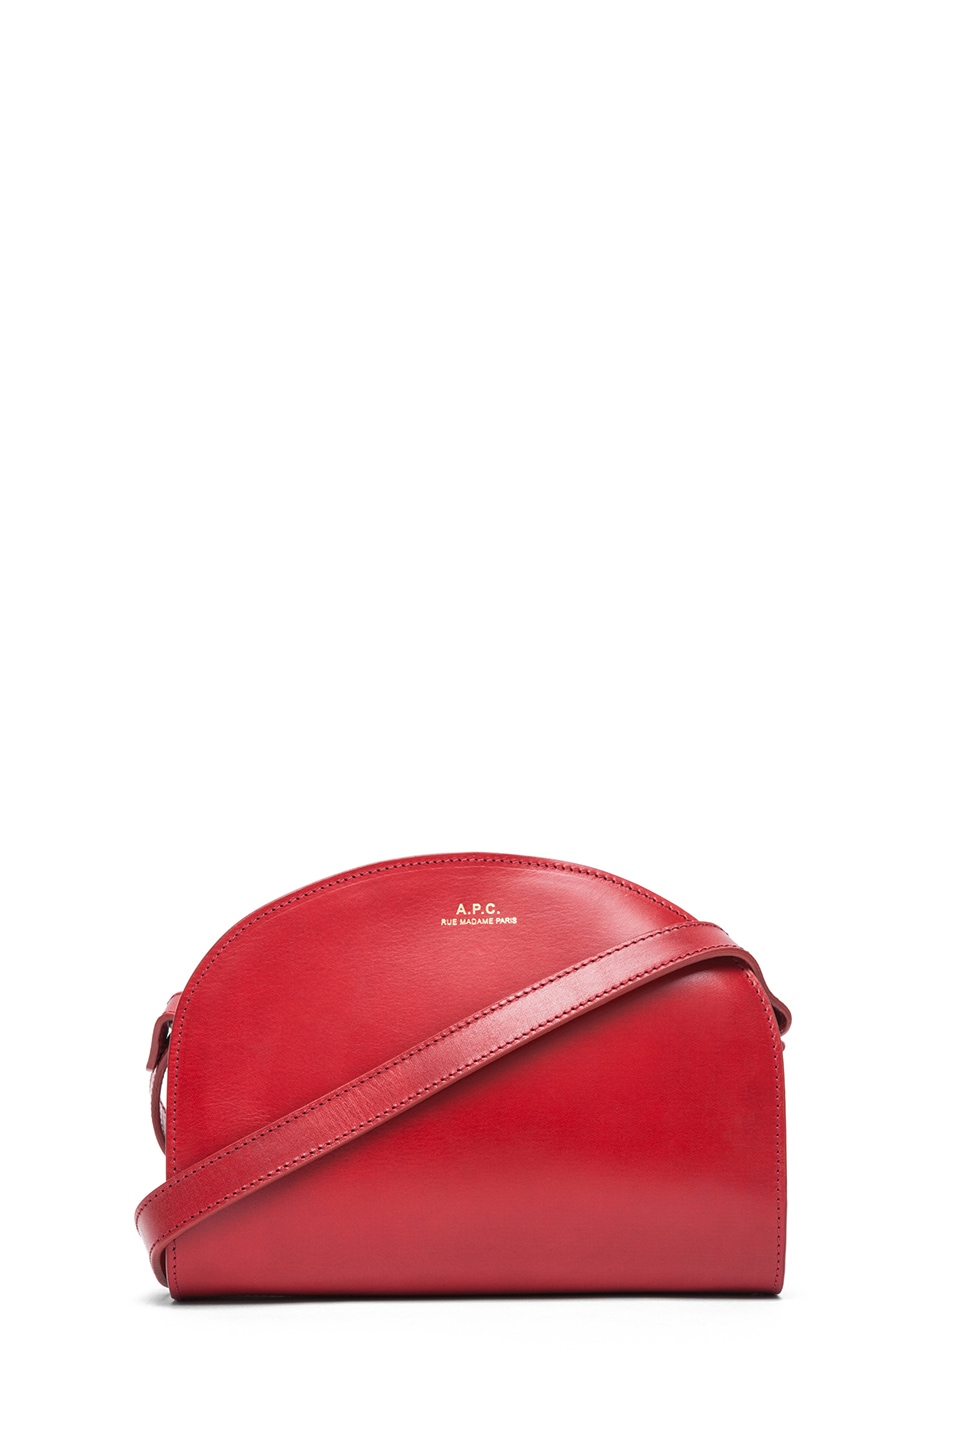 Image 1 of A.P.C. Half Moon Bag in Rouge